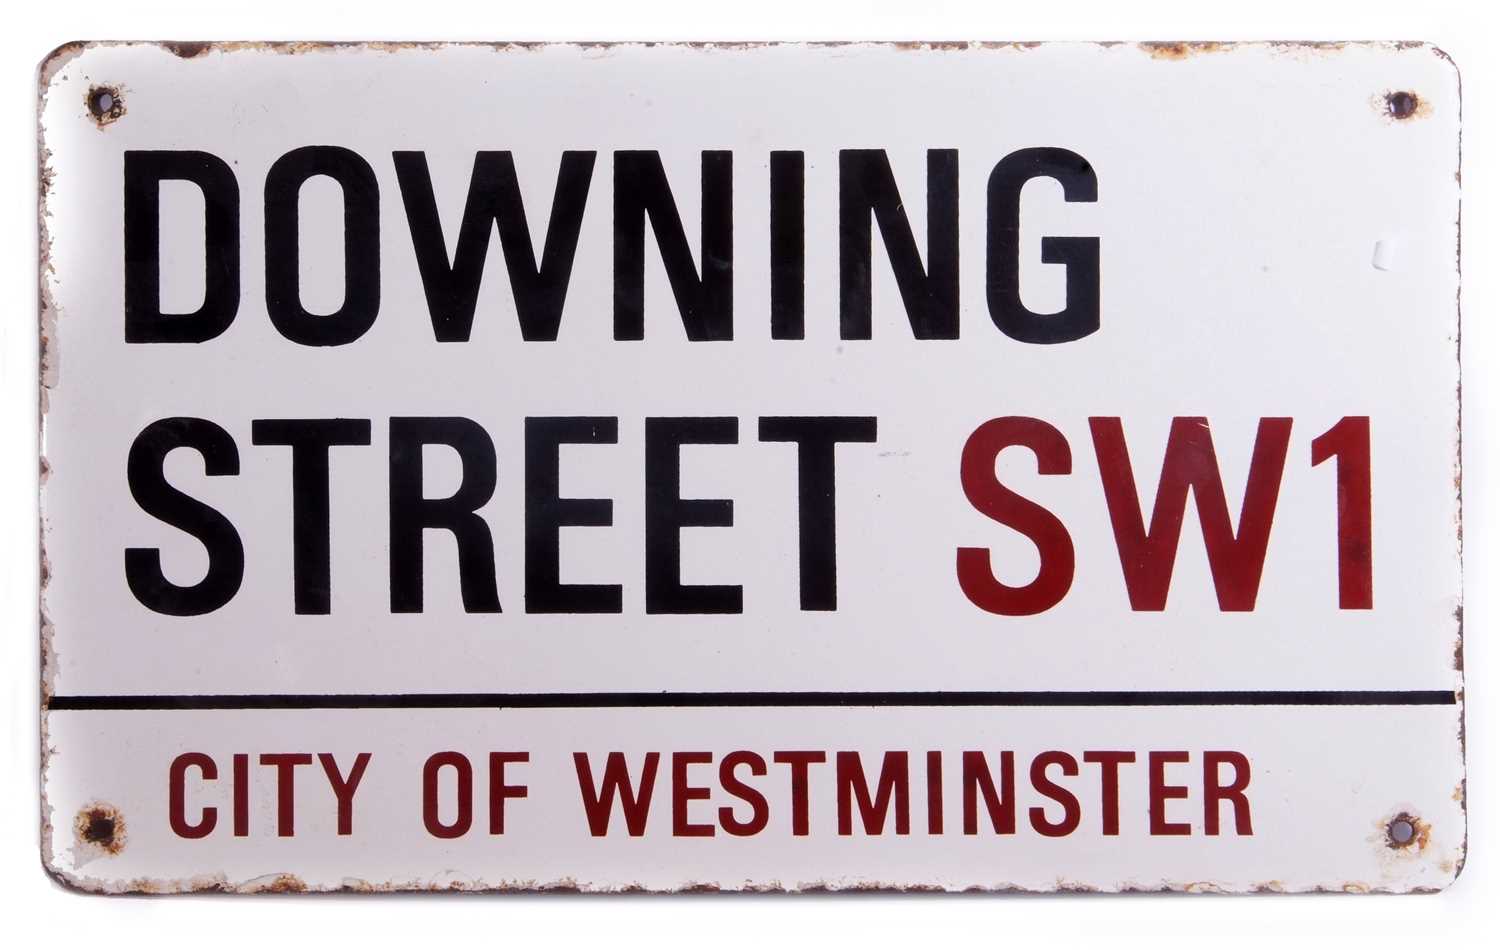 City of Westminster Downing Street sign in black and red lettering on white enamel background